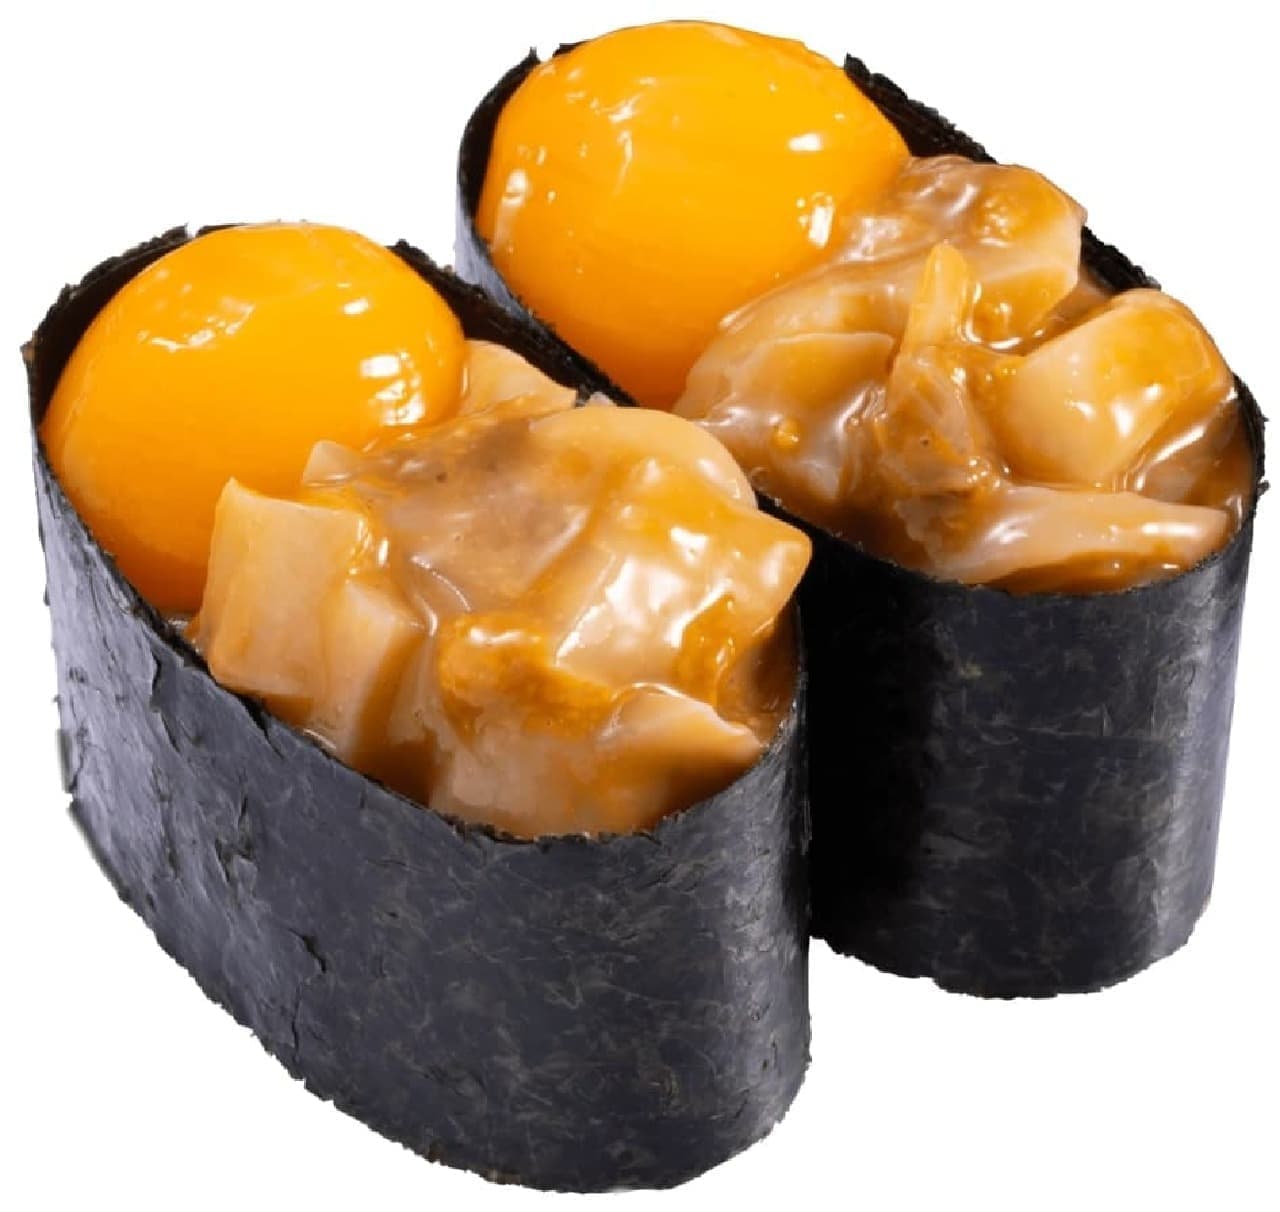 Kappa Sushi "In-store preparation of mussels with sea urchin and egg yolk gunkan